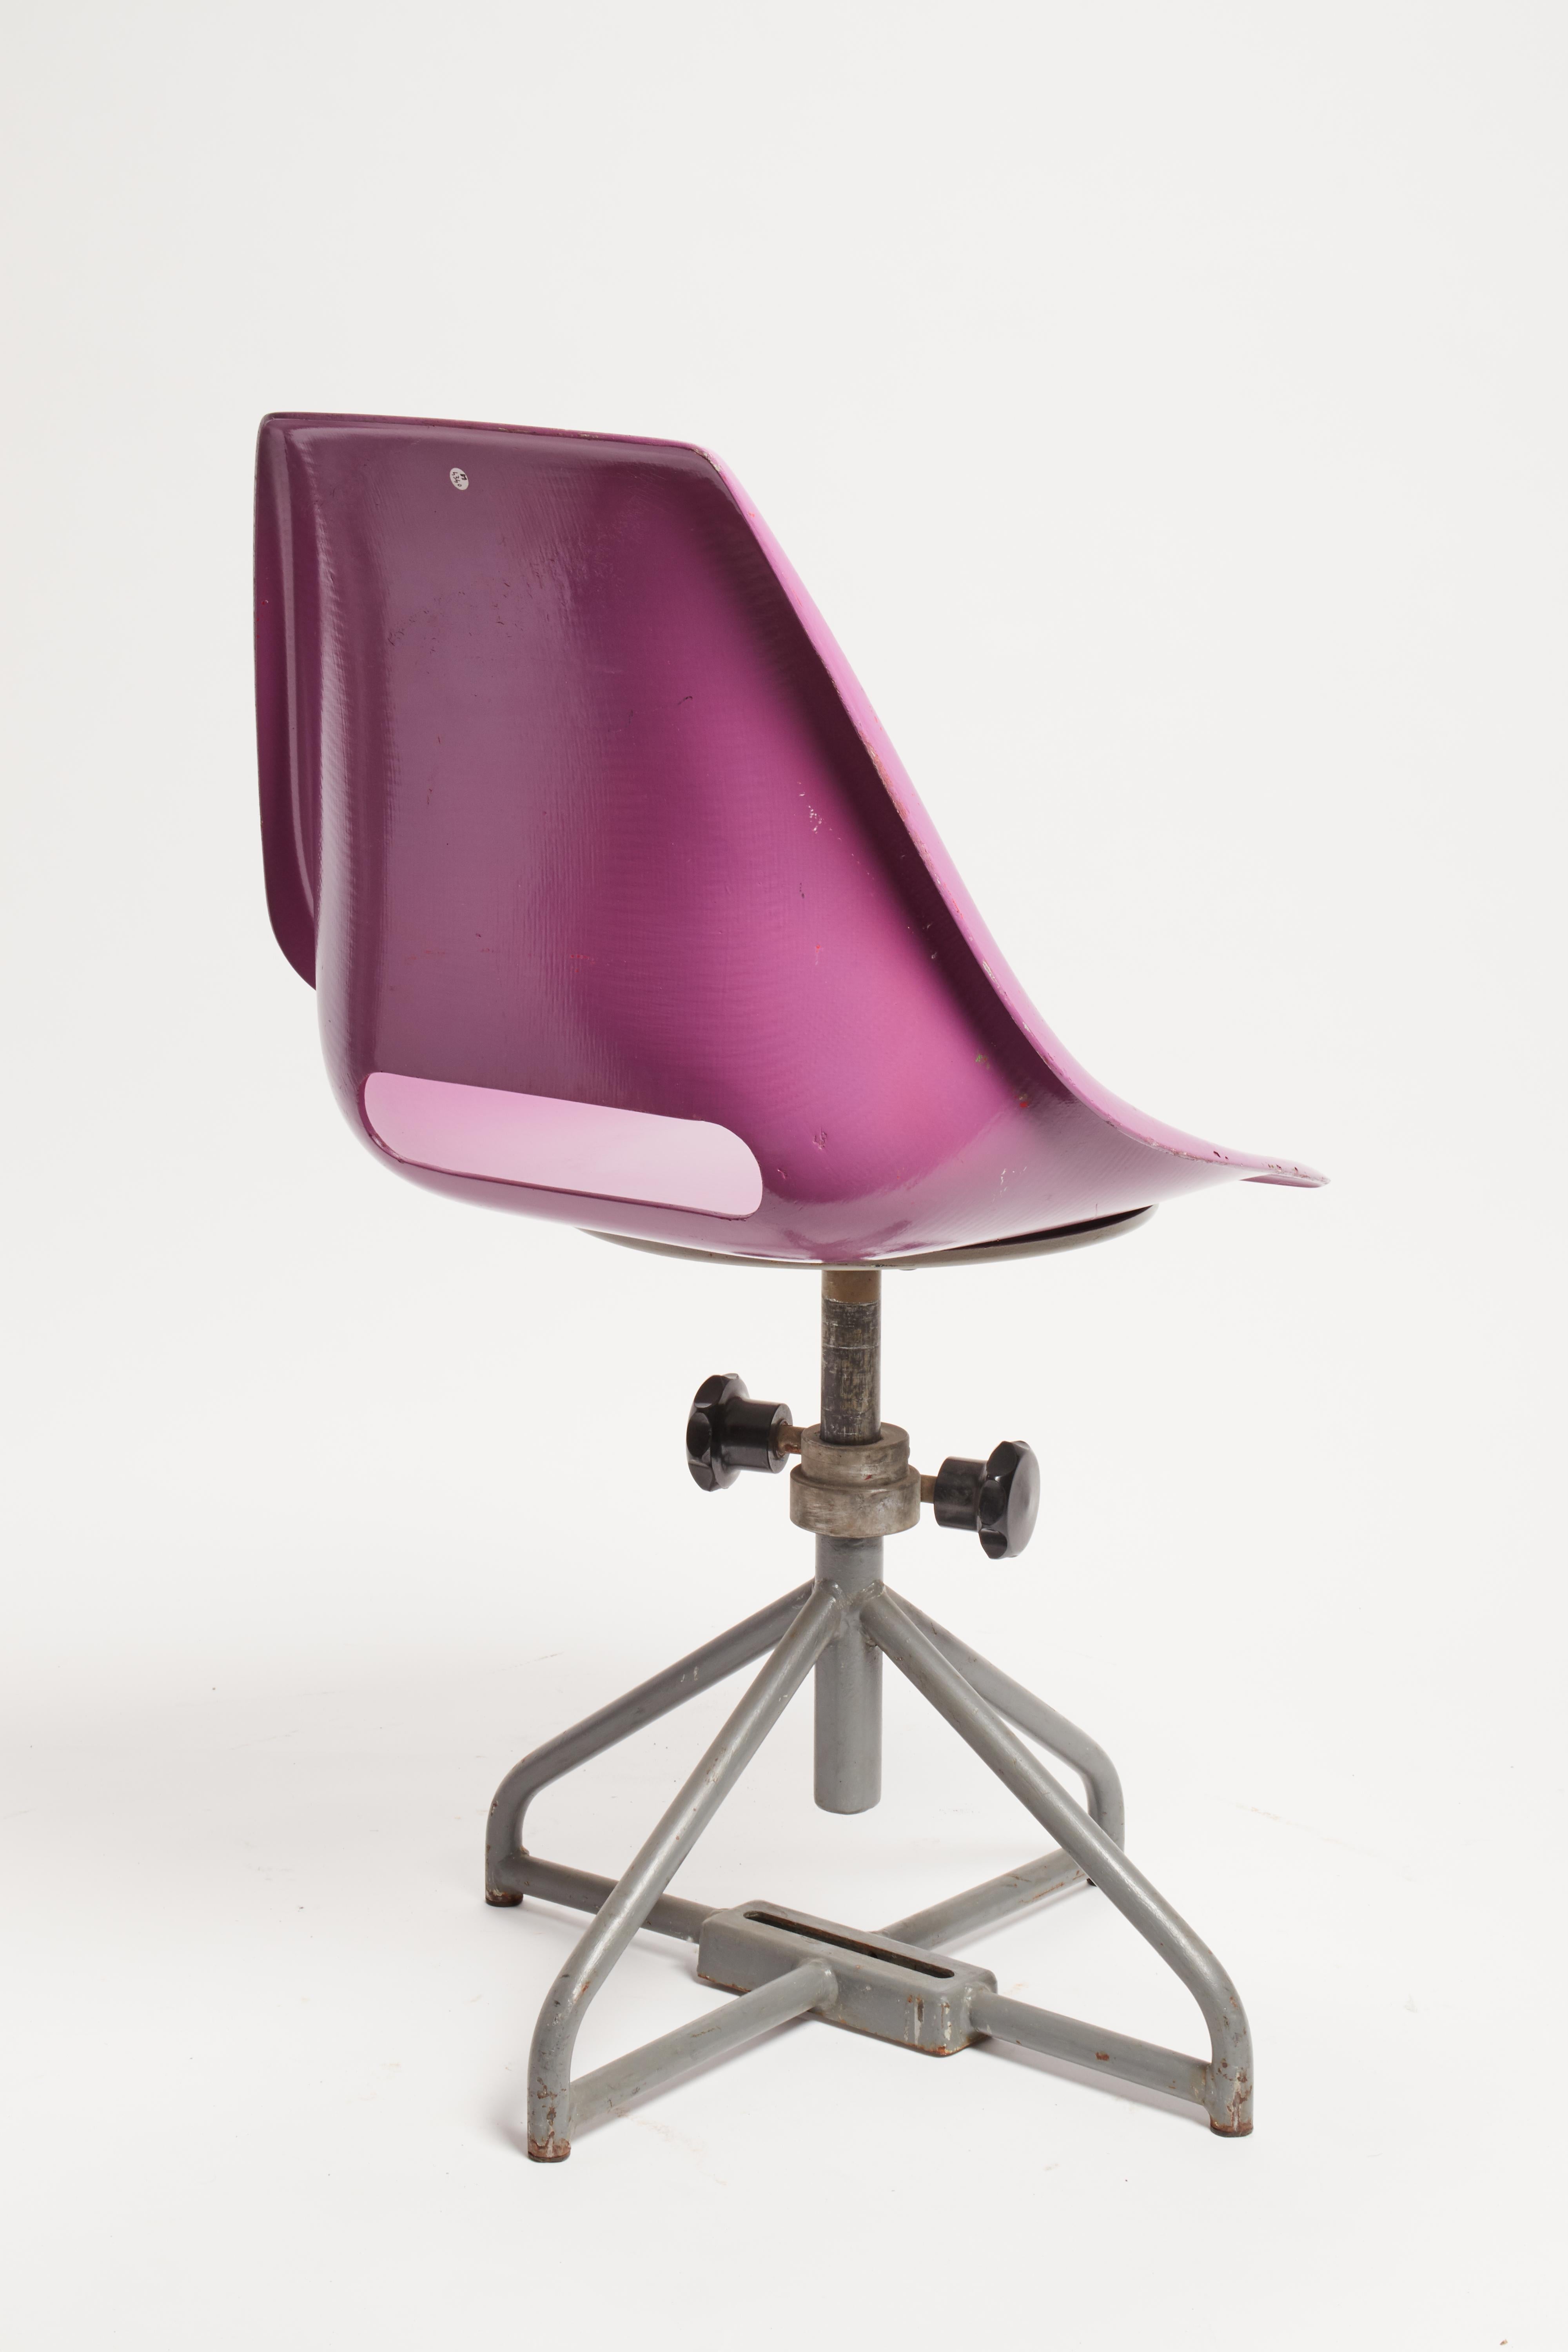 Multicolor Adjustable Fiberglass Chairs, Italy, 1950 For Sale 7